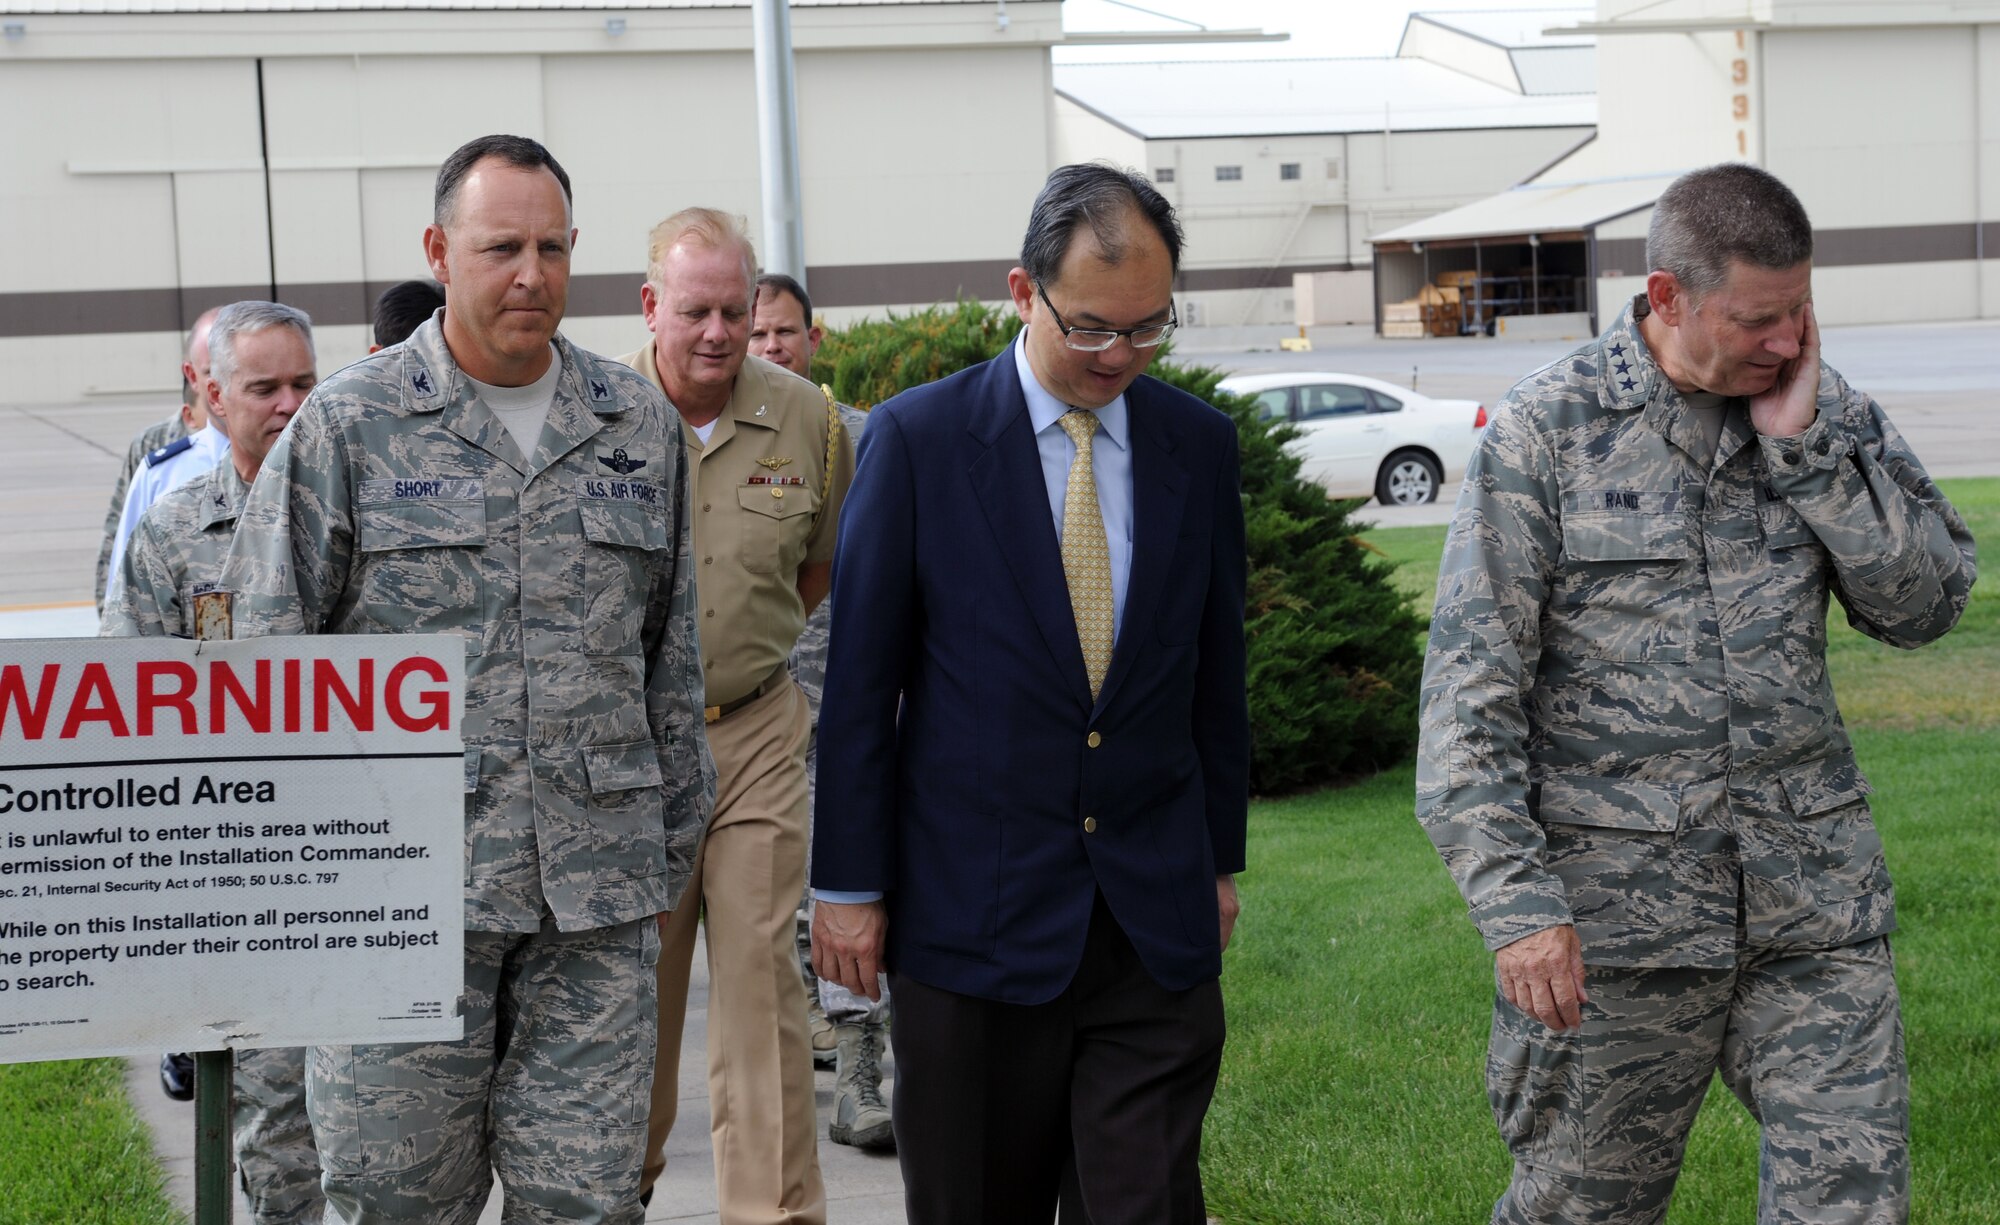 From left, U.S Air Force Col. Christopher Short, 366th Fighter Wing commander, Mr. Chiang Chie Foo, Republic of Singapore Permanent Secretary (Defence), and Lt. Gen. Robin Rand, 12th Air Force commander, walk during a tour July 15, 2013, at Mountain Home Air Force Base, Idaho. General Rand and Mr. Foo's tour included stops at the Gunfighter Club and Wing Headquarters building. (U.S. Air Force photo by Senior Airman Benjamin Sutton/ Released)
